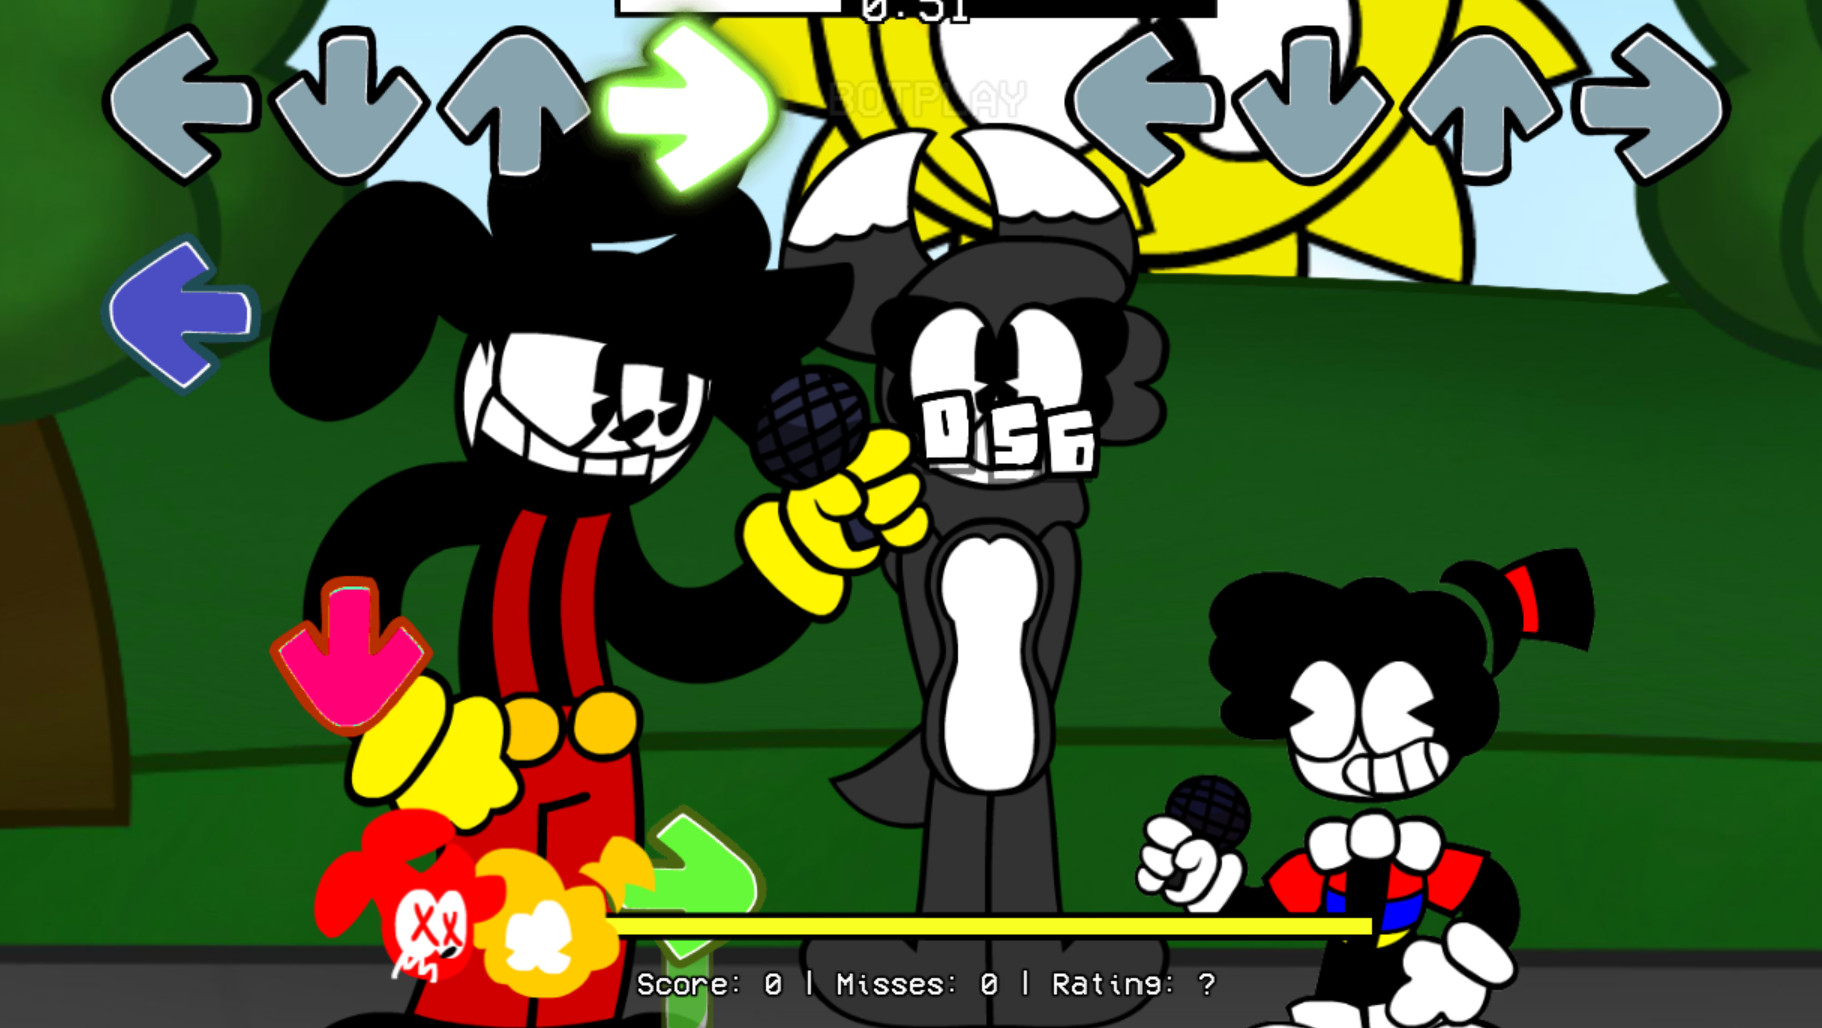 Felix 'n' Friends: Saturday Morning Cartoon. (a fnf mod) by  MultiColorIncorpated - Game Jolt